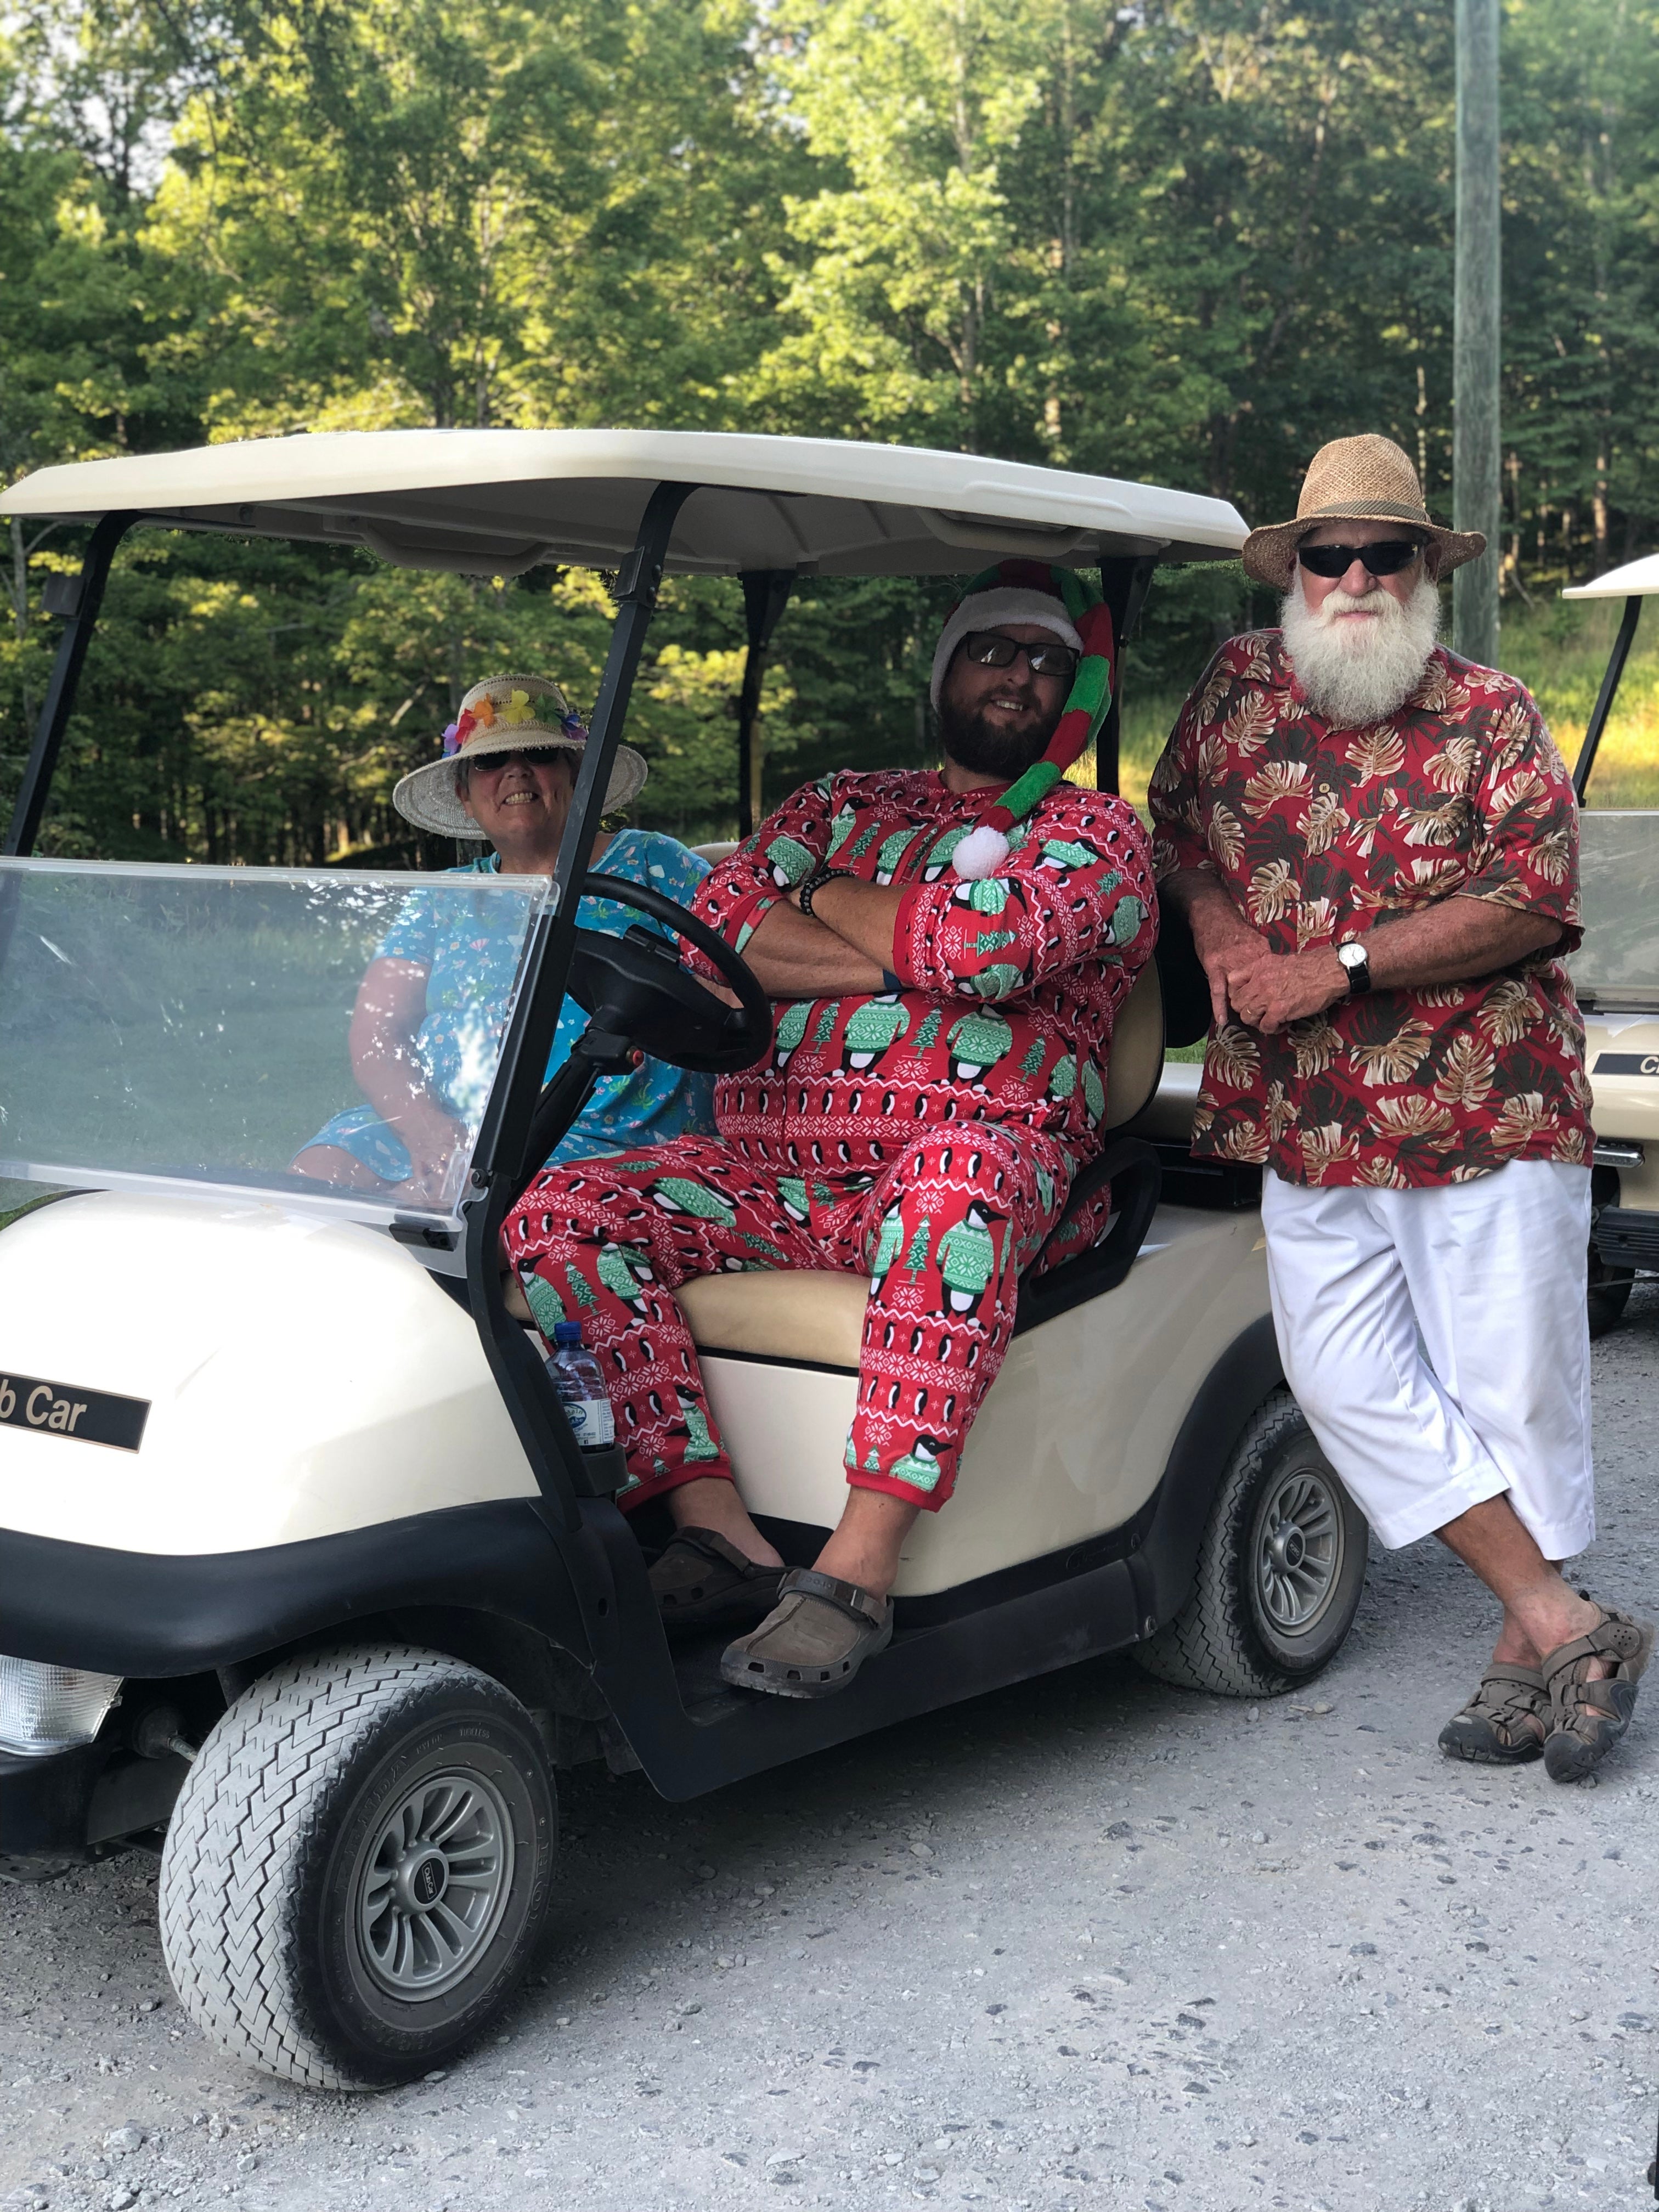 Christmas in July! - Santa came to visit